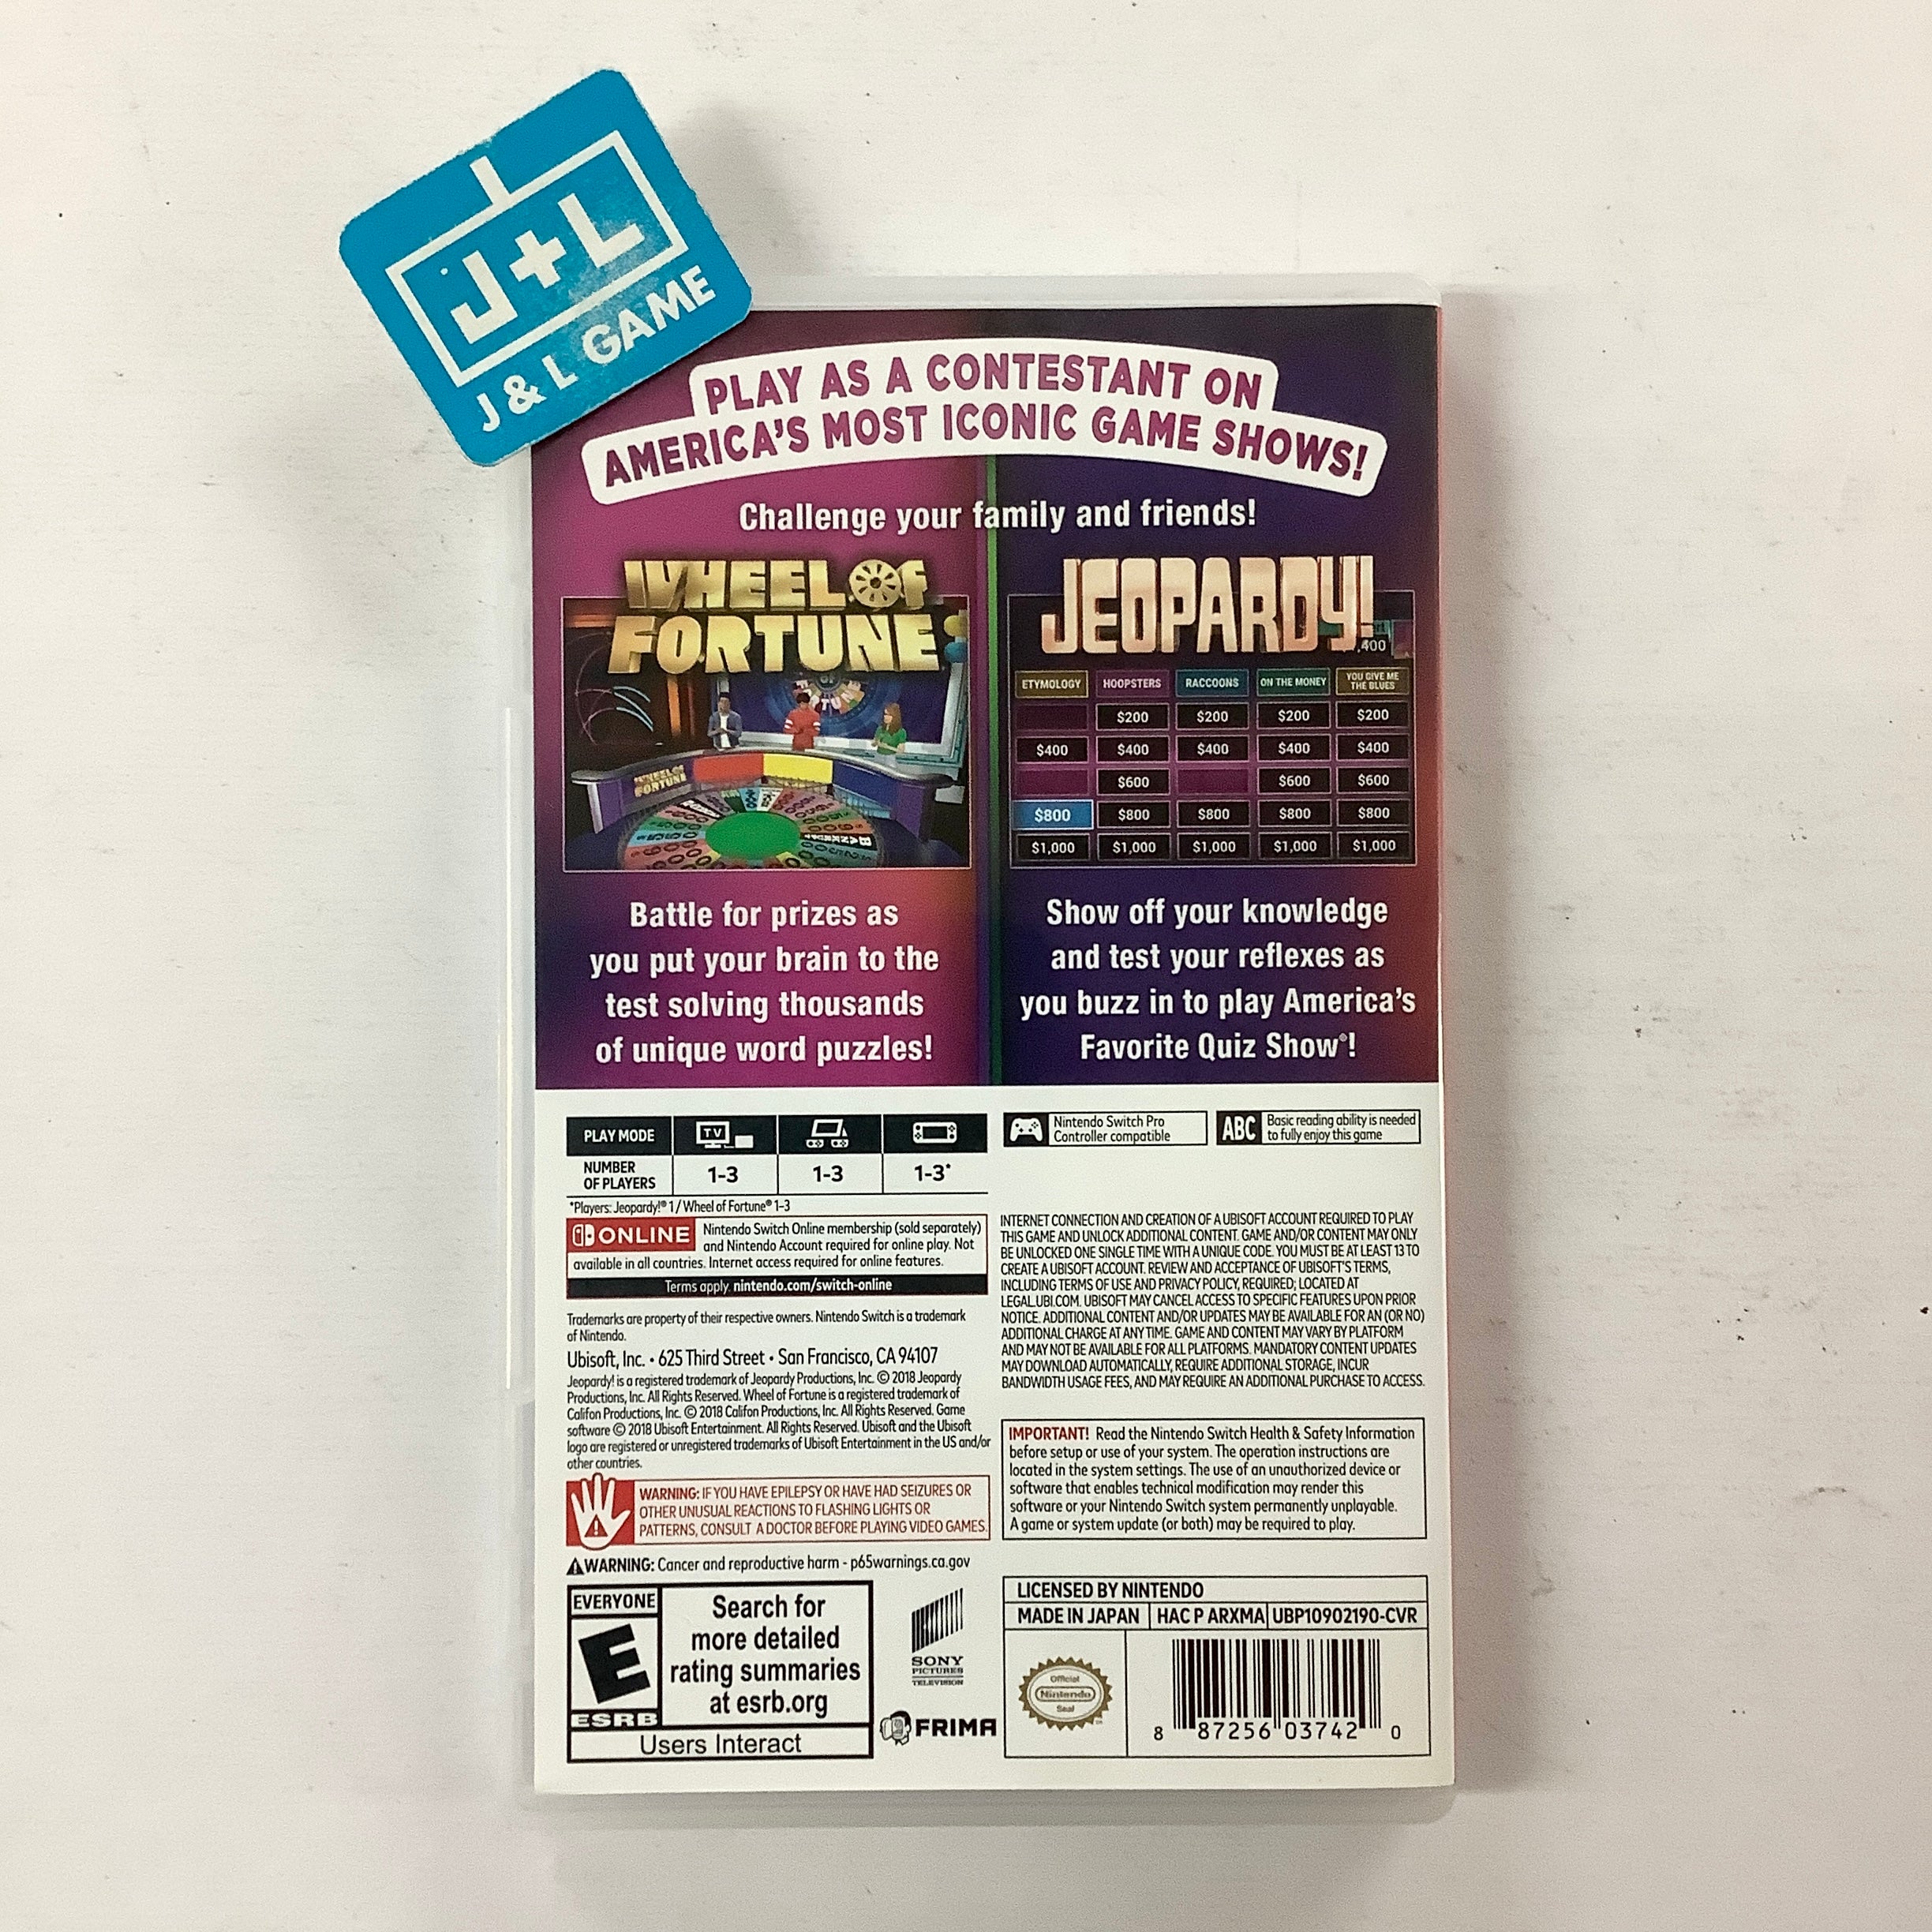 America's Greatest Game Shows: Wheel of Fortune & Jeopardy - (NSW) Nintendo Switch [Pre-Owned] Video Games Ubisoft   